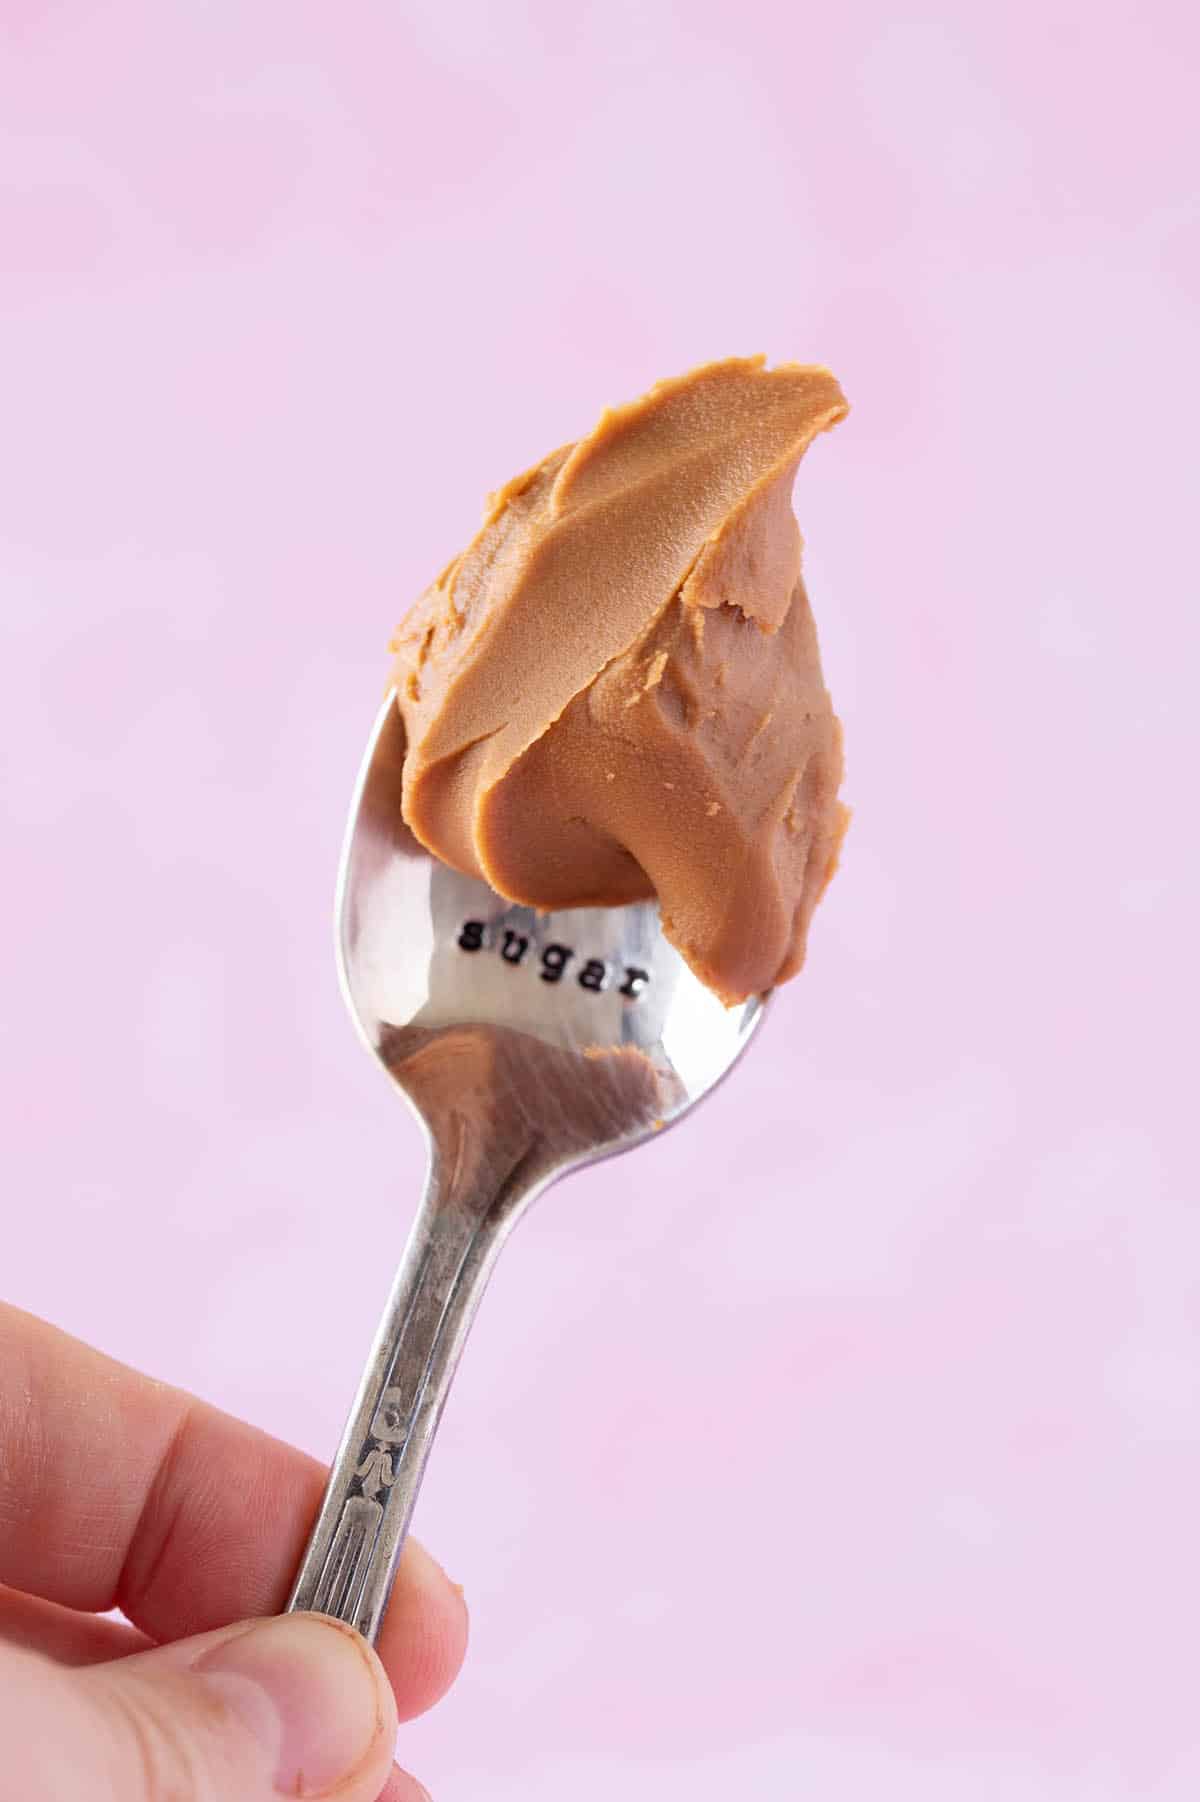 A hand holding a spoon that's full of Biscoff cookie spread